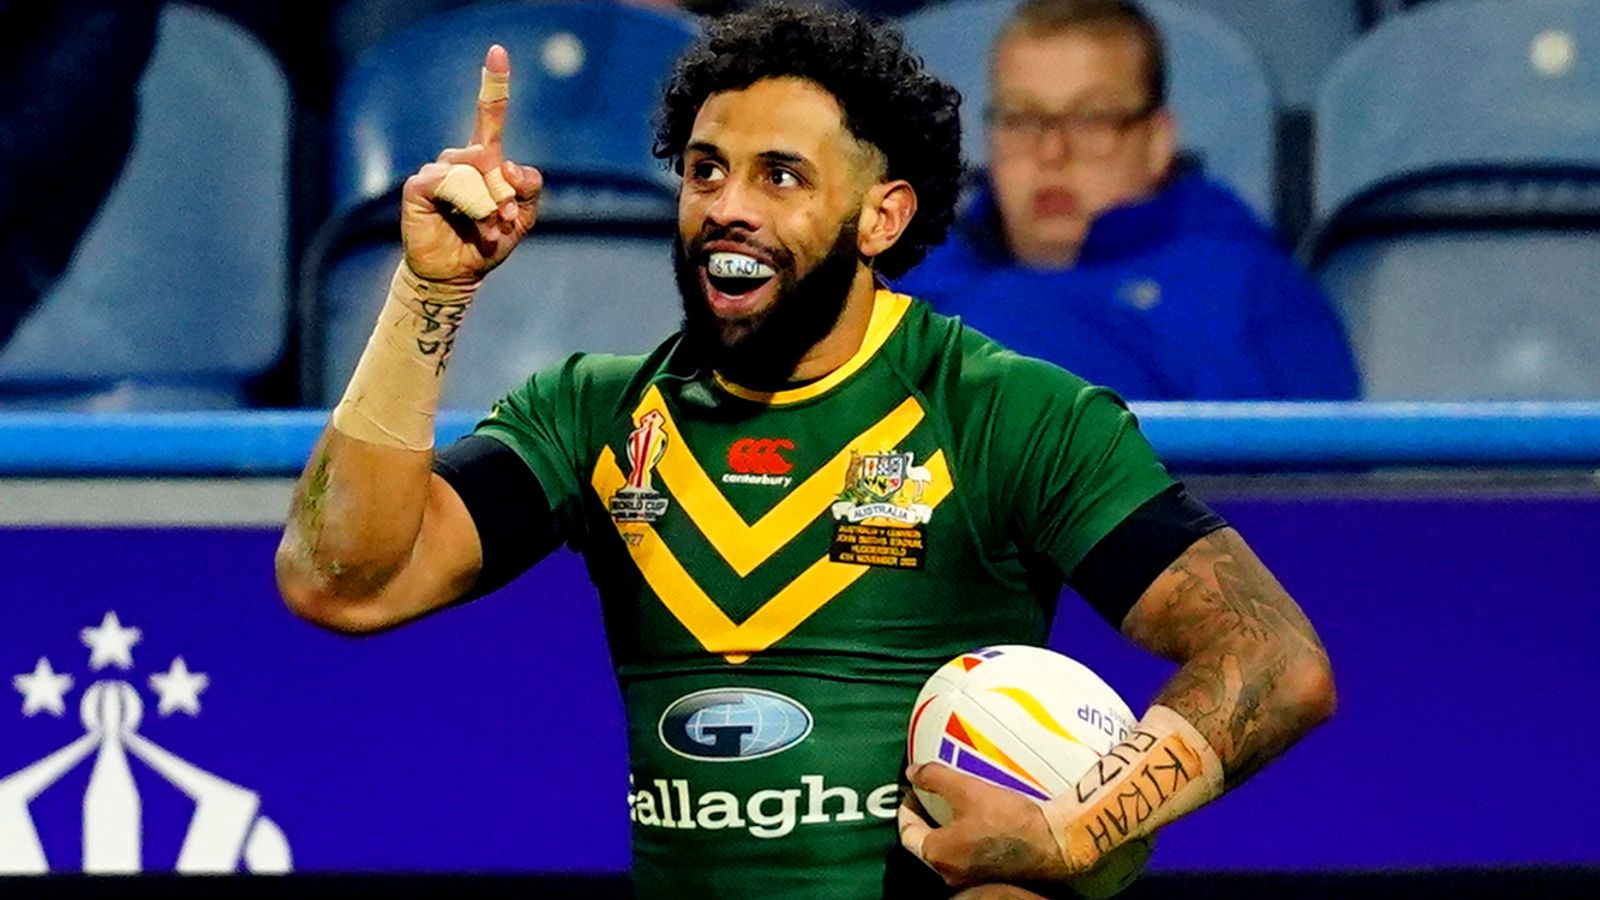 rugby-league-world-cup-australia-secure-semi-final-spot-with-comprehensive-victory-over-lebanon-as-josh-addo-carr-shines